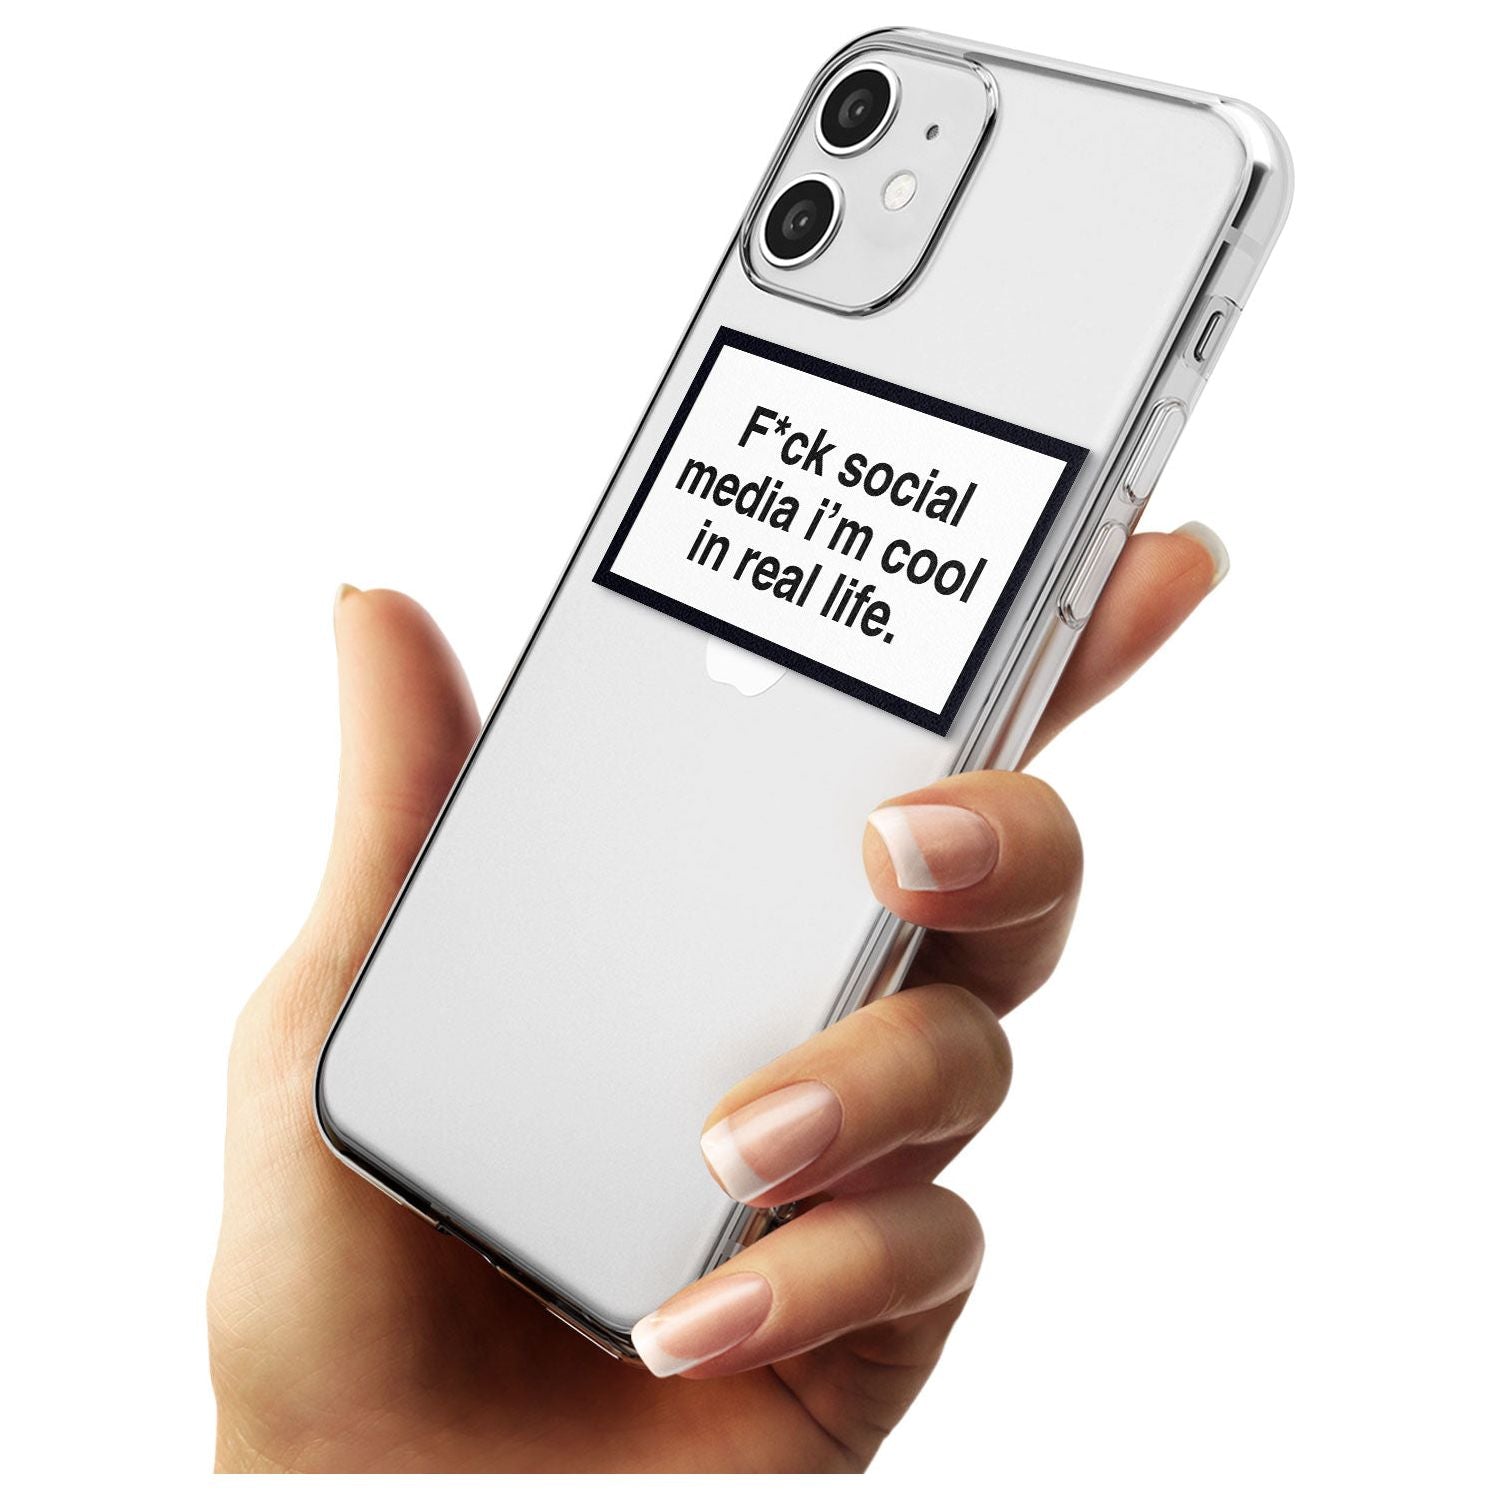 F*ck social media I'm cool in real life Black Impact Phone Case for iPhone 11